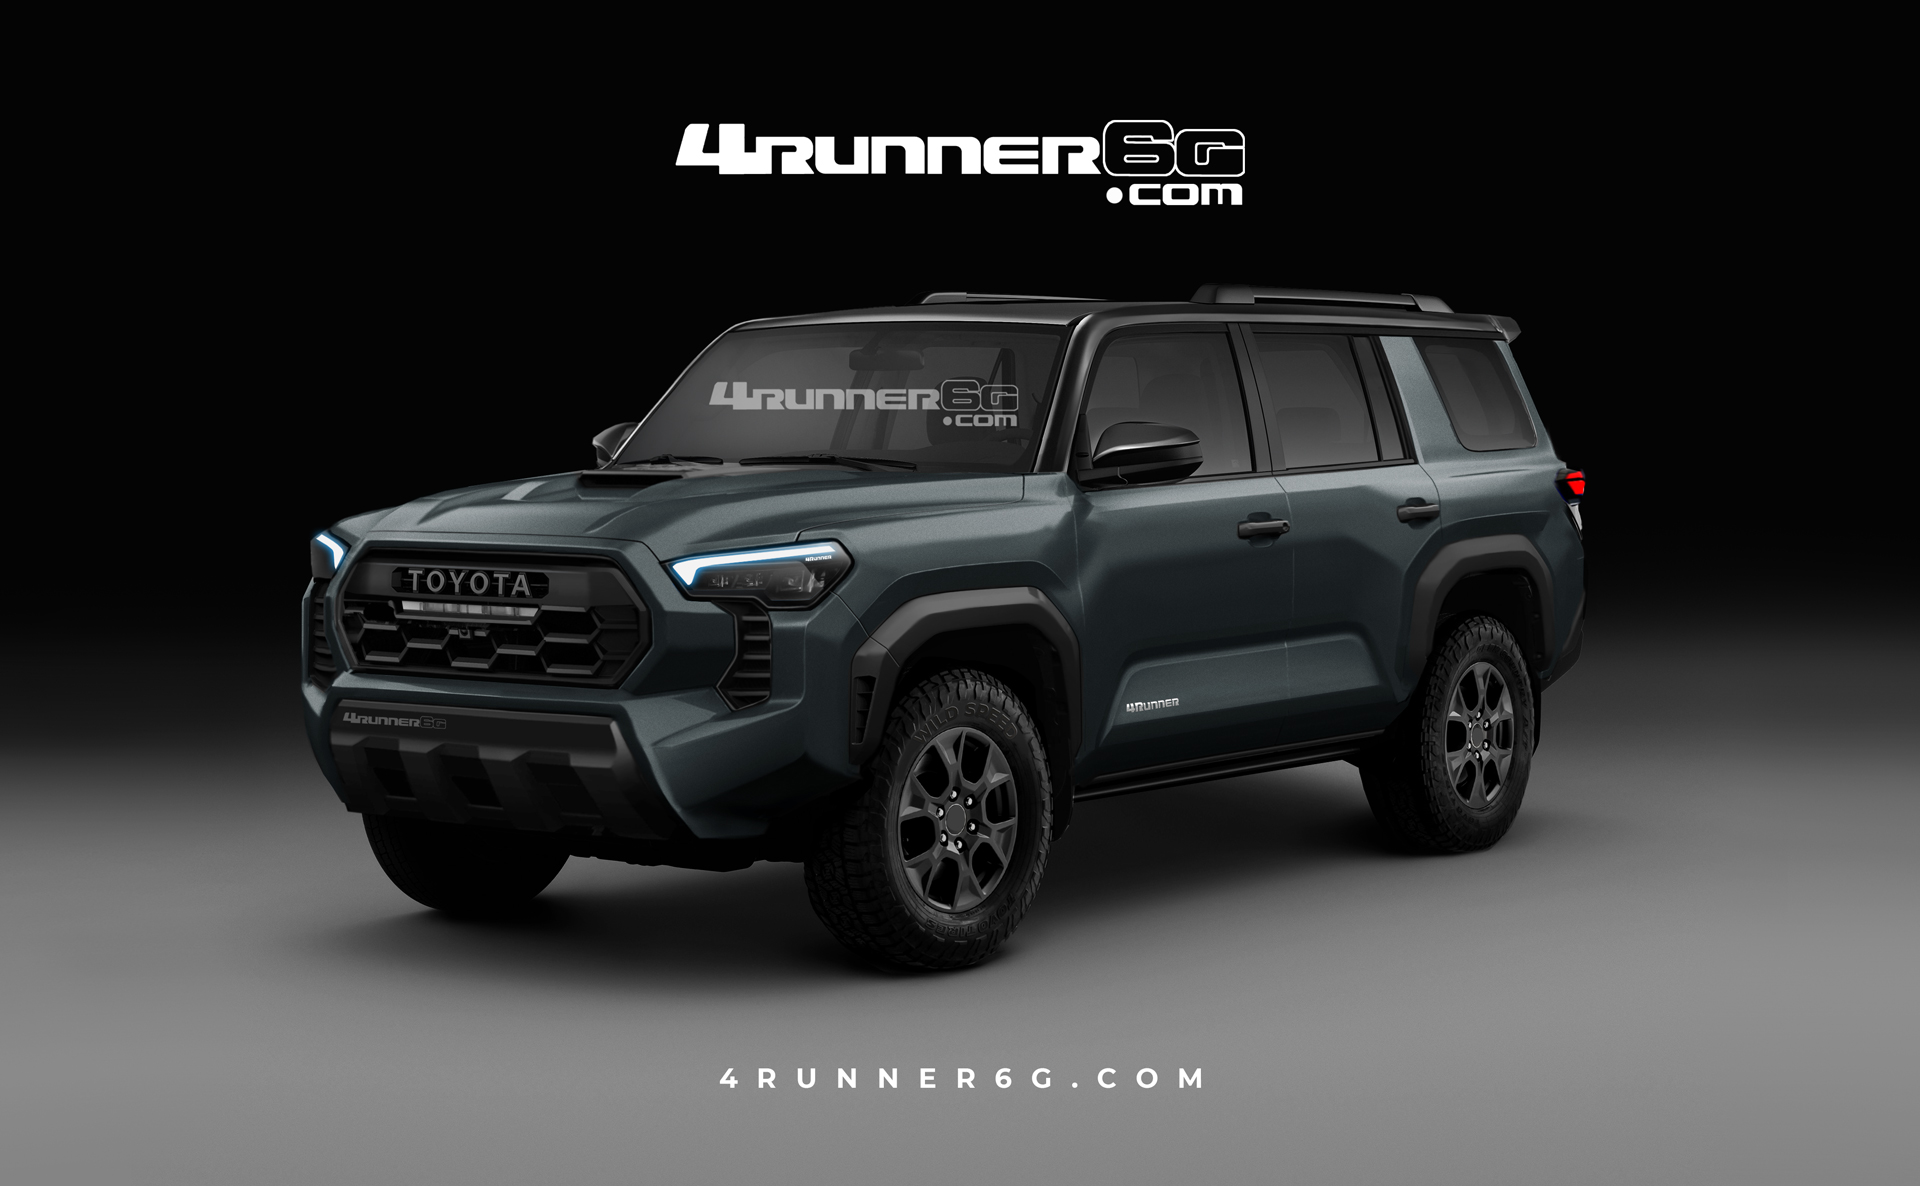 2025 Toyota 4runner 2025 4Runner (6th Gen) News, Specs, Engines, Release Date, Production Date & Preview Renderings -- Insider Info (as of 7/30/23) 2025 Toyota-4Runner-Front-S-Underground